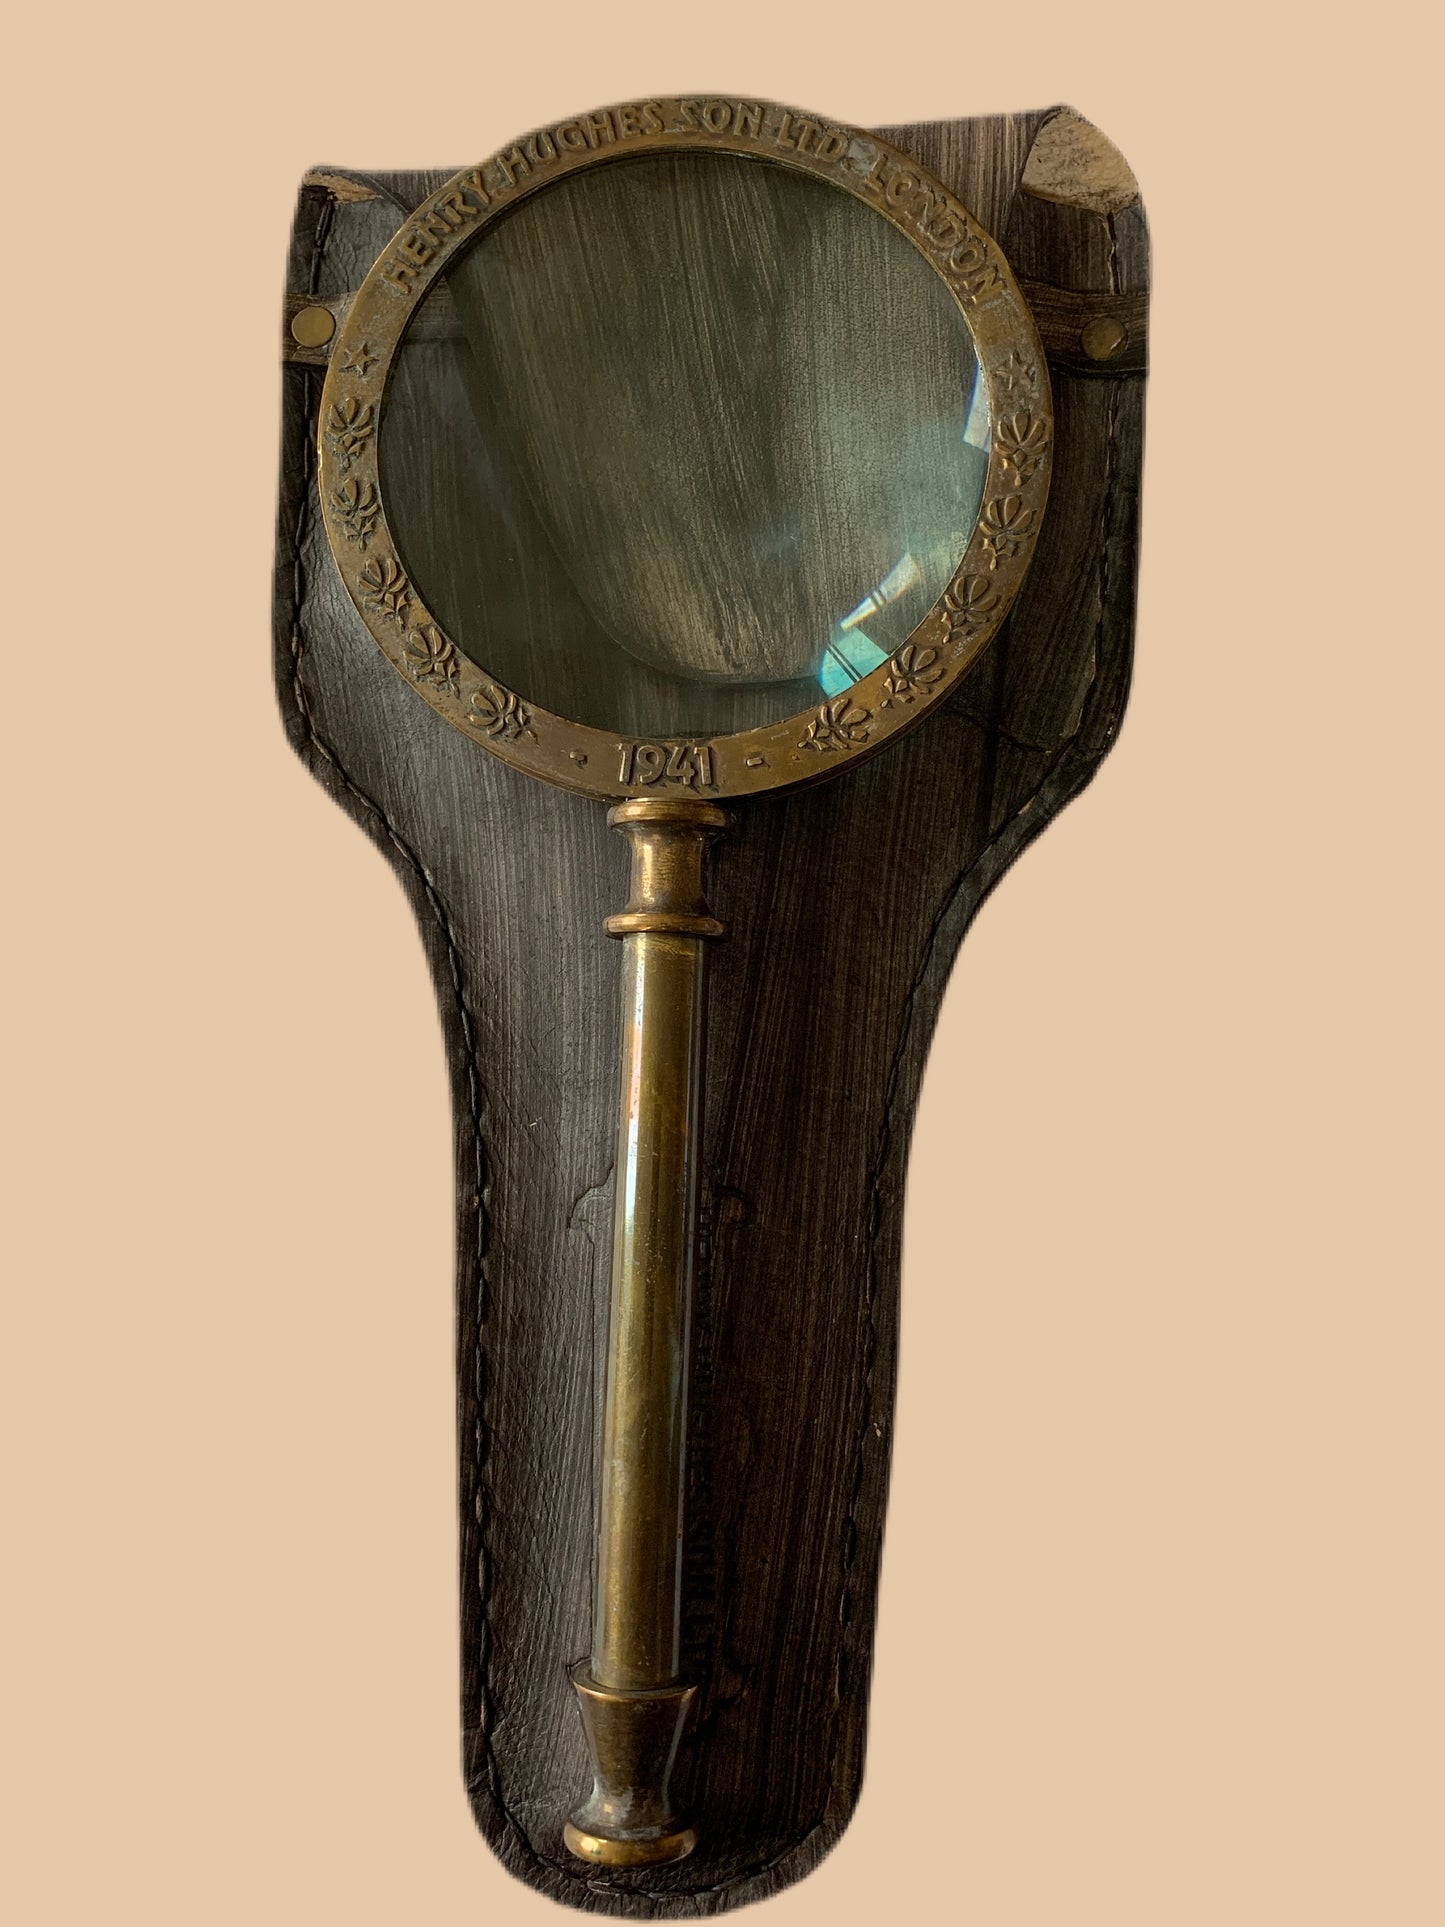 Heavy magnifier with leather case